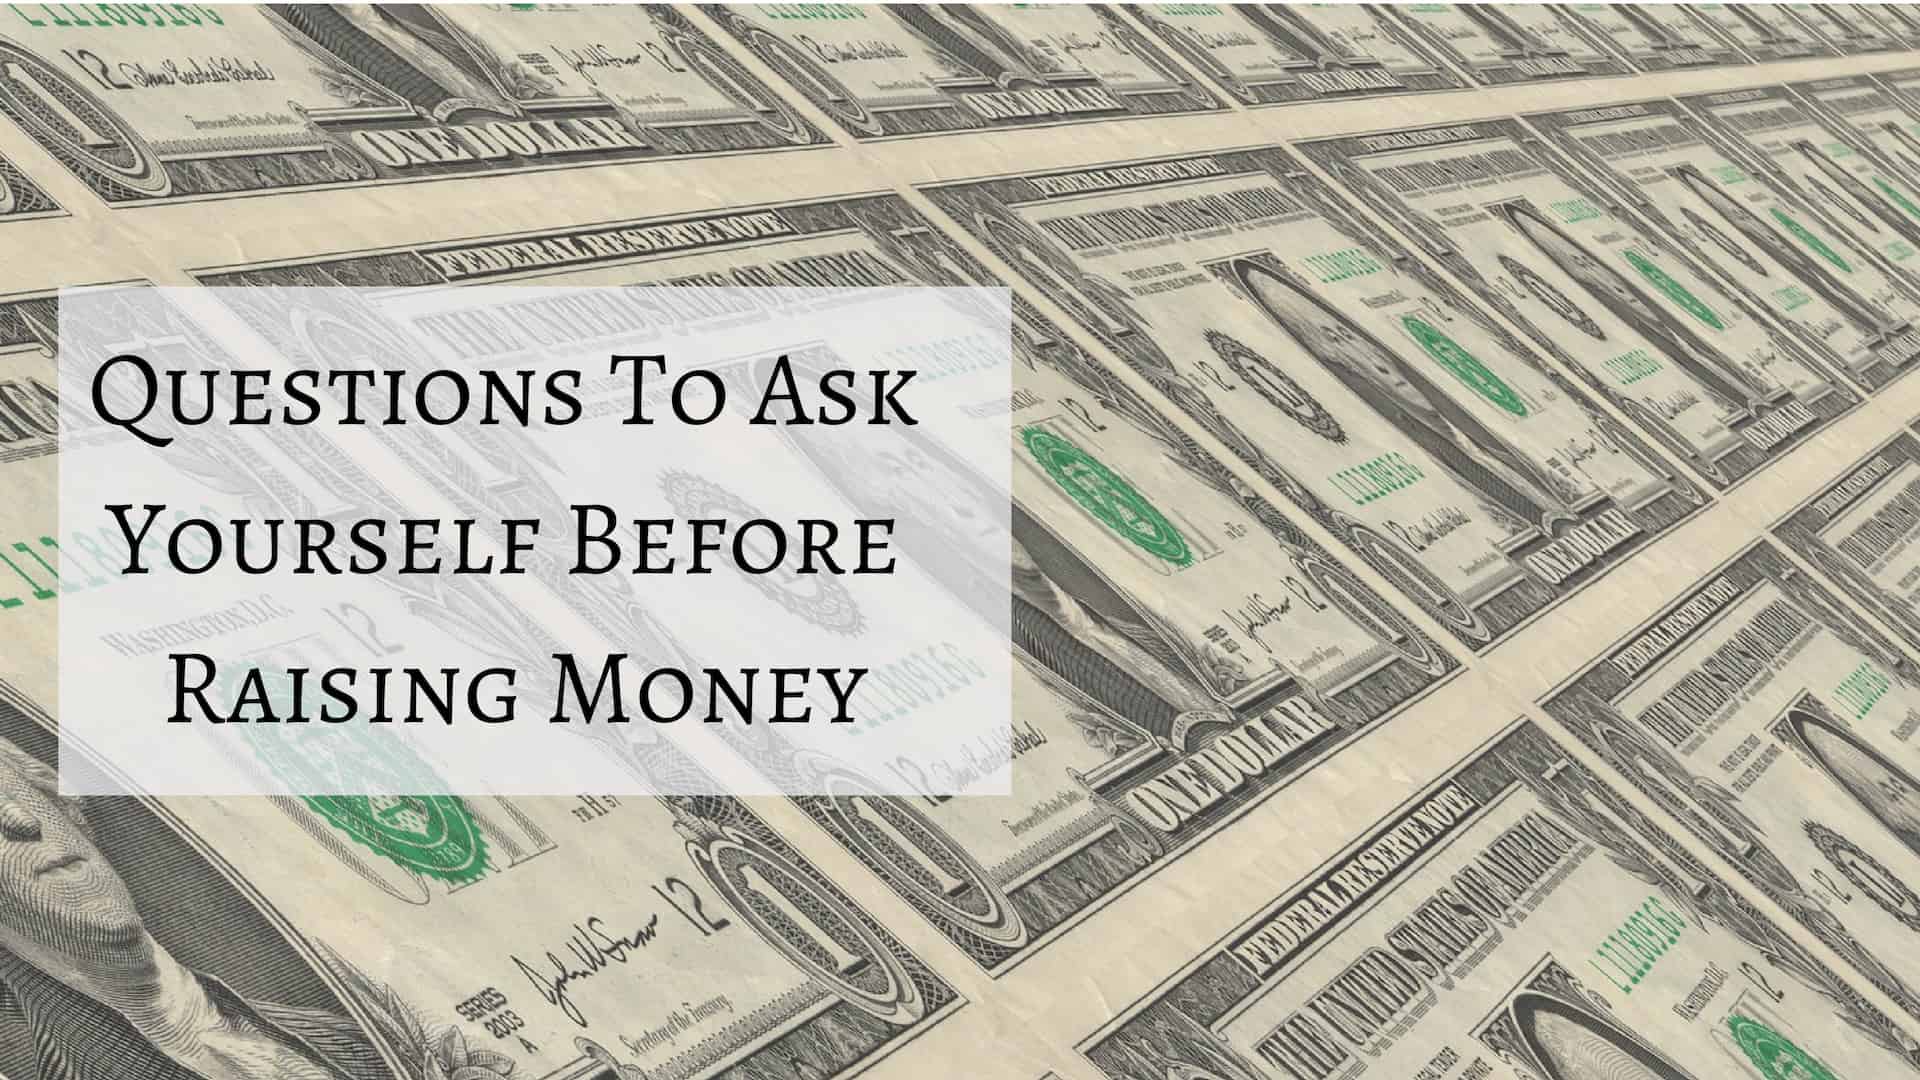 Questions To Ask Yourself Before Raising Money